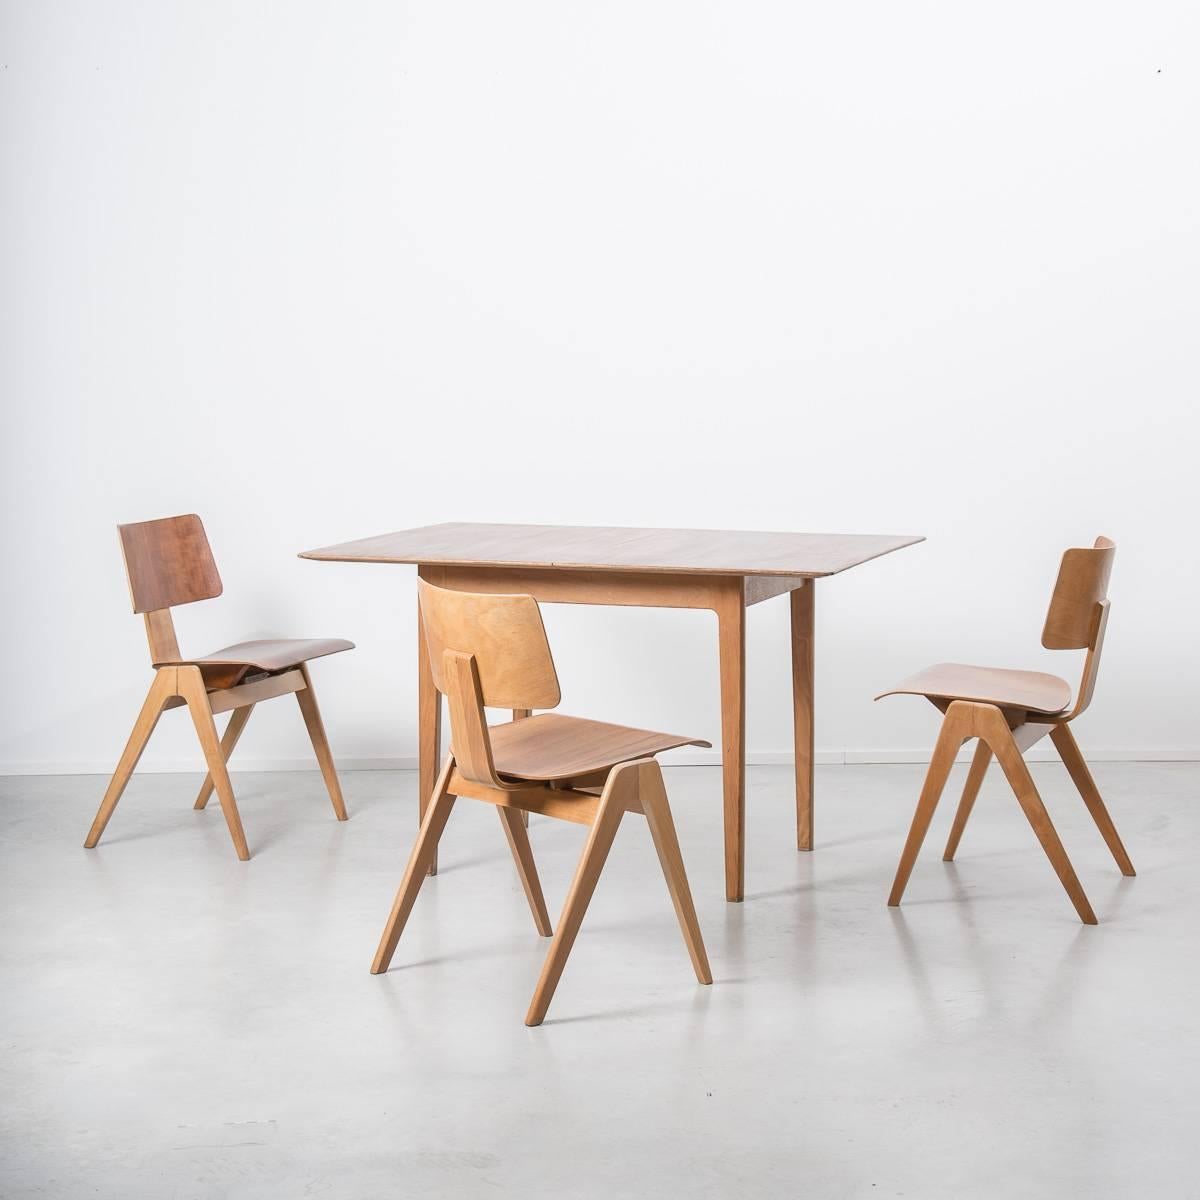 Robin Day Hille Stak dining table and four chairs. The table is made from a solid beech frame and walnut veneered top. It folds down for small spaces. The table and chairs have just been fully restored and are in excellent condition.

Robin Day